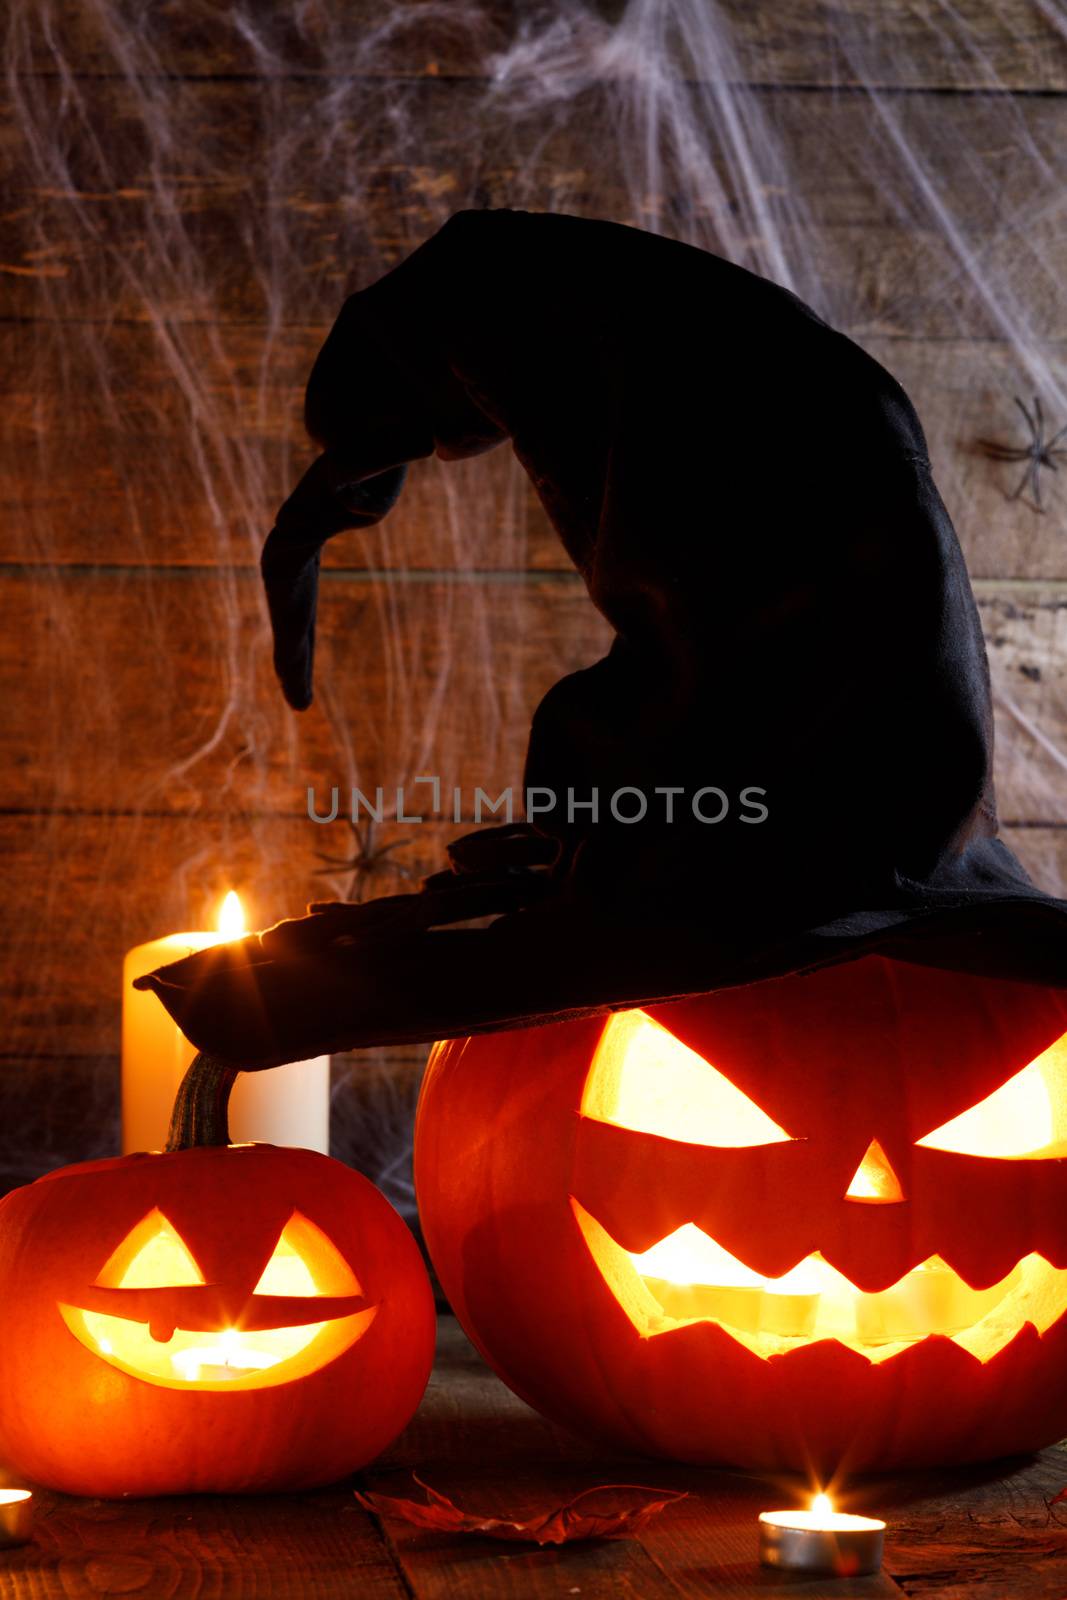 Jack O Lantern Halloween pumpkin with witches hat , spiders on web and burning candles